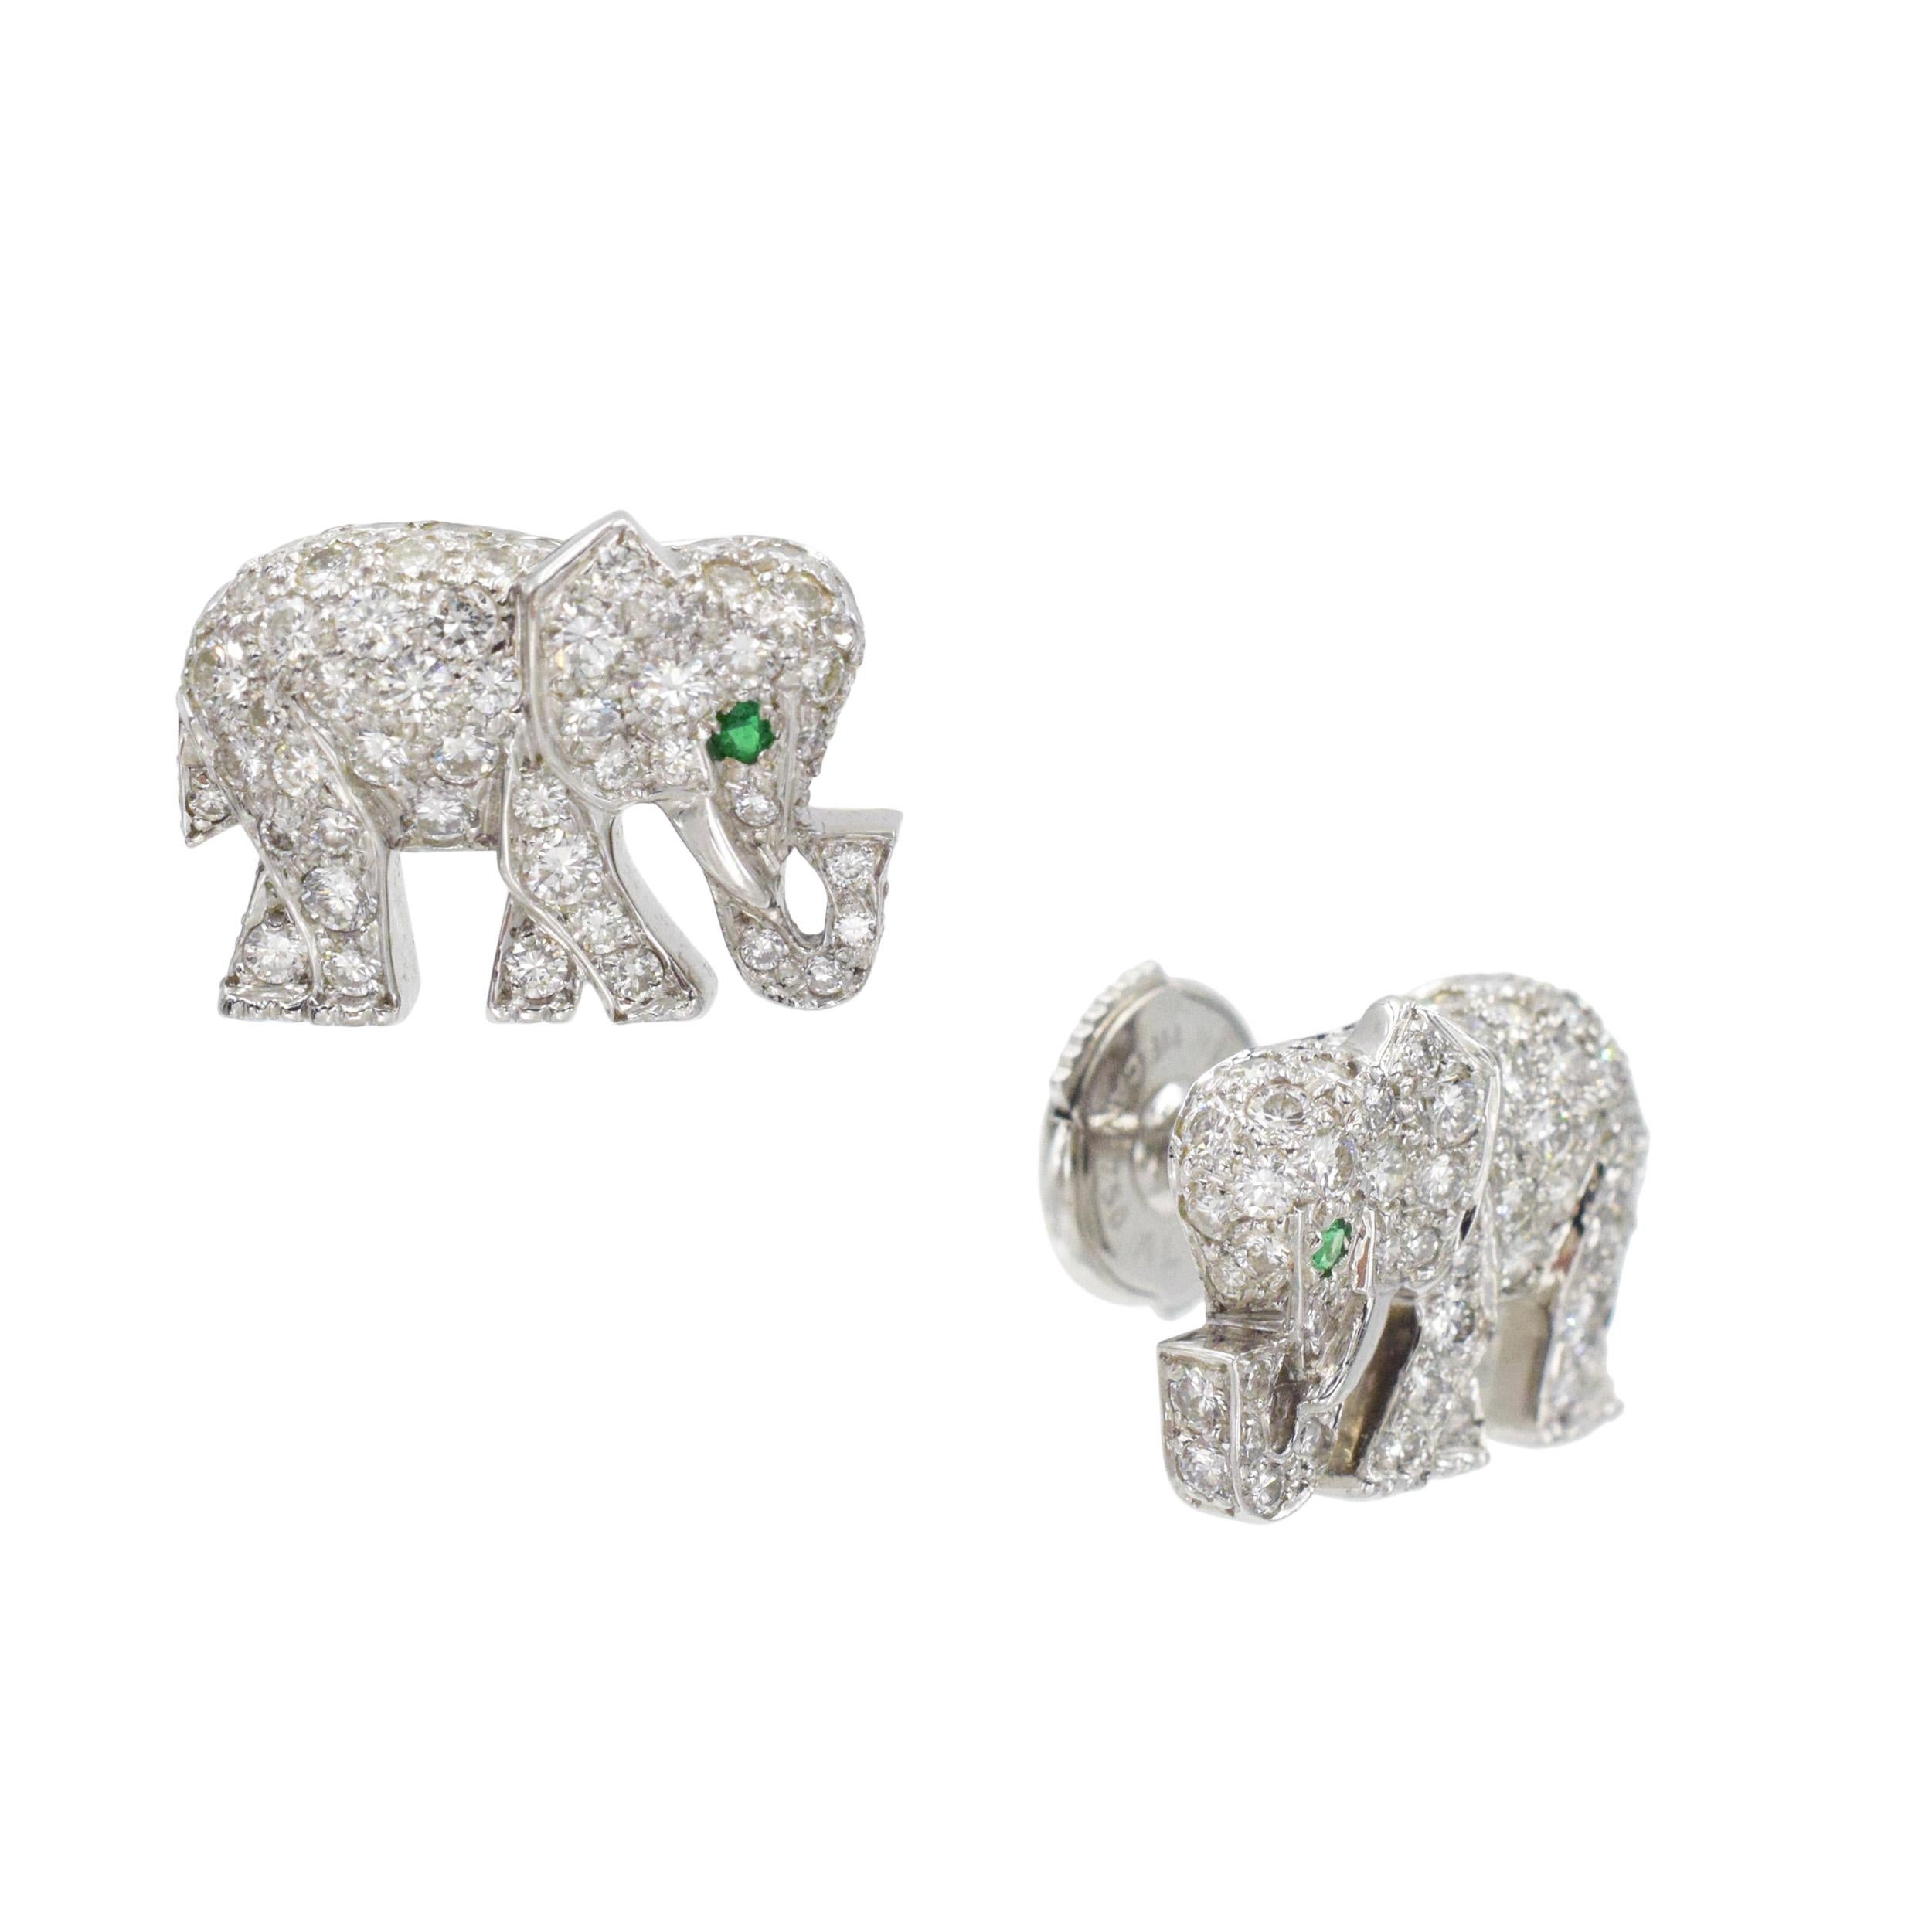 Cartier Diamond and Emerald Elephant Brooch and Earrings Set In Platinum. 3